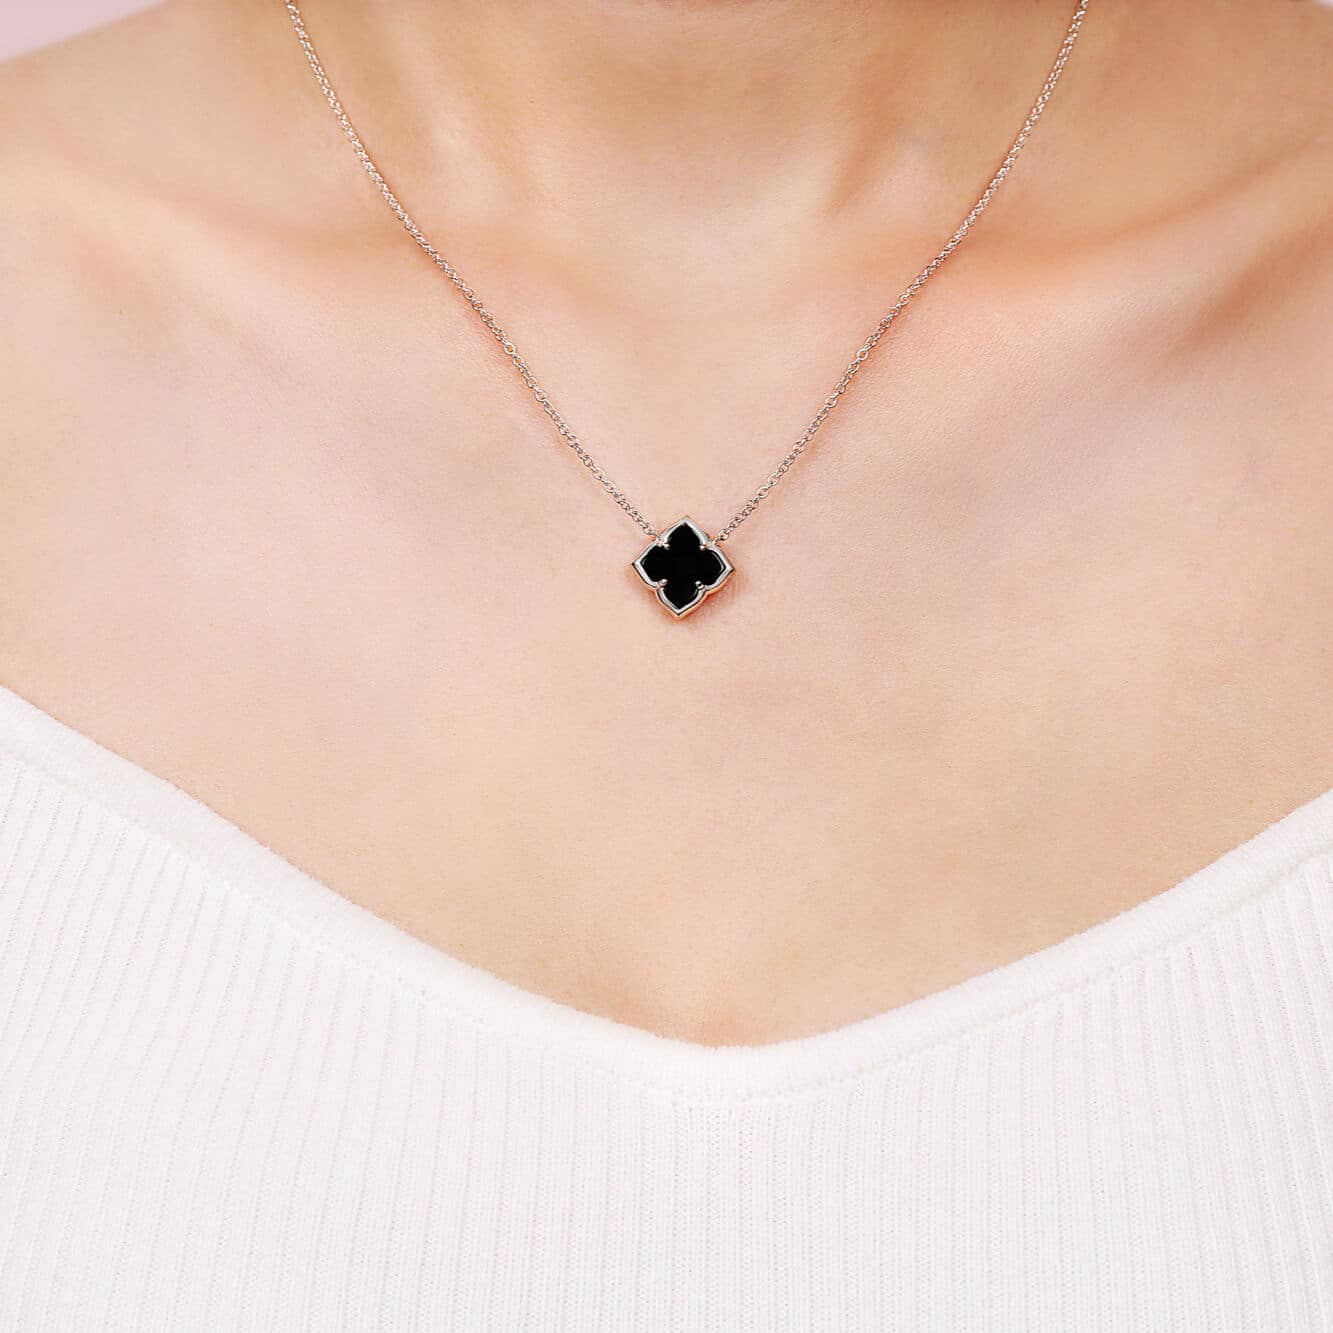 Women's Black Onyx Flower Pendant Necklace in 925 Sterling Silver - 18 Inch Adjustable Cable Chain - Flora | Lavari Jewelers